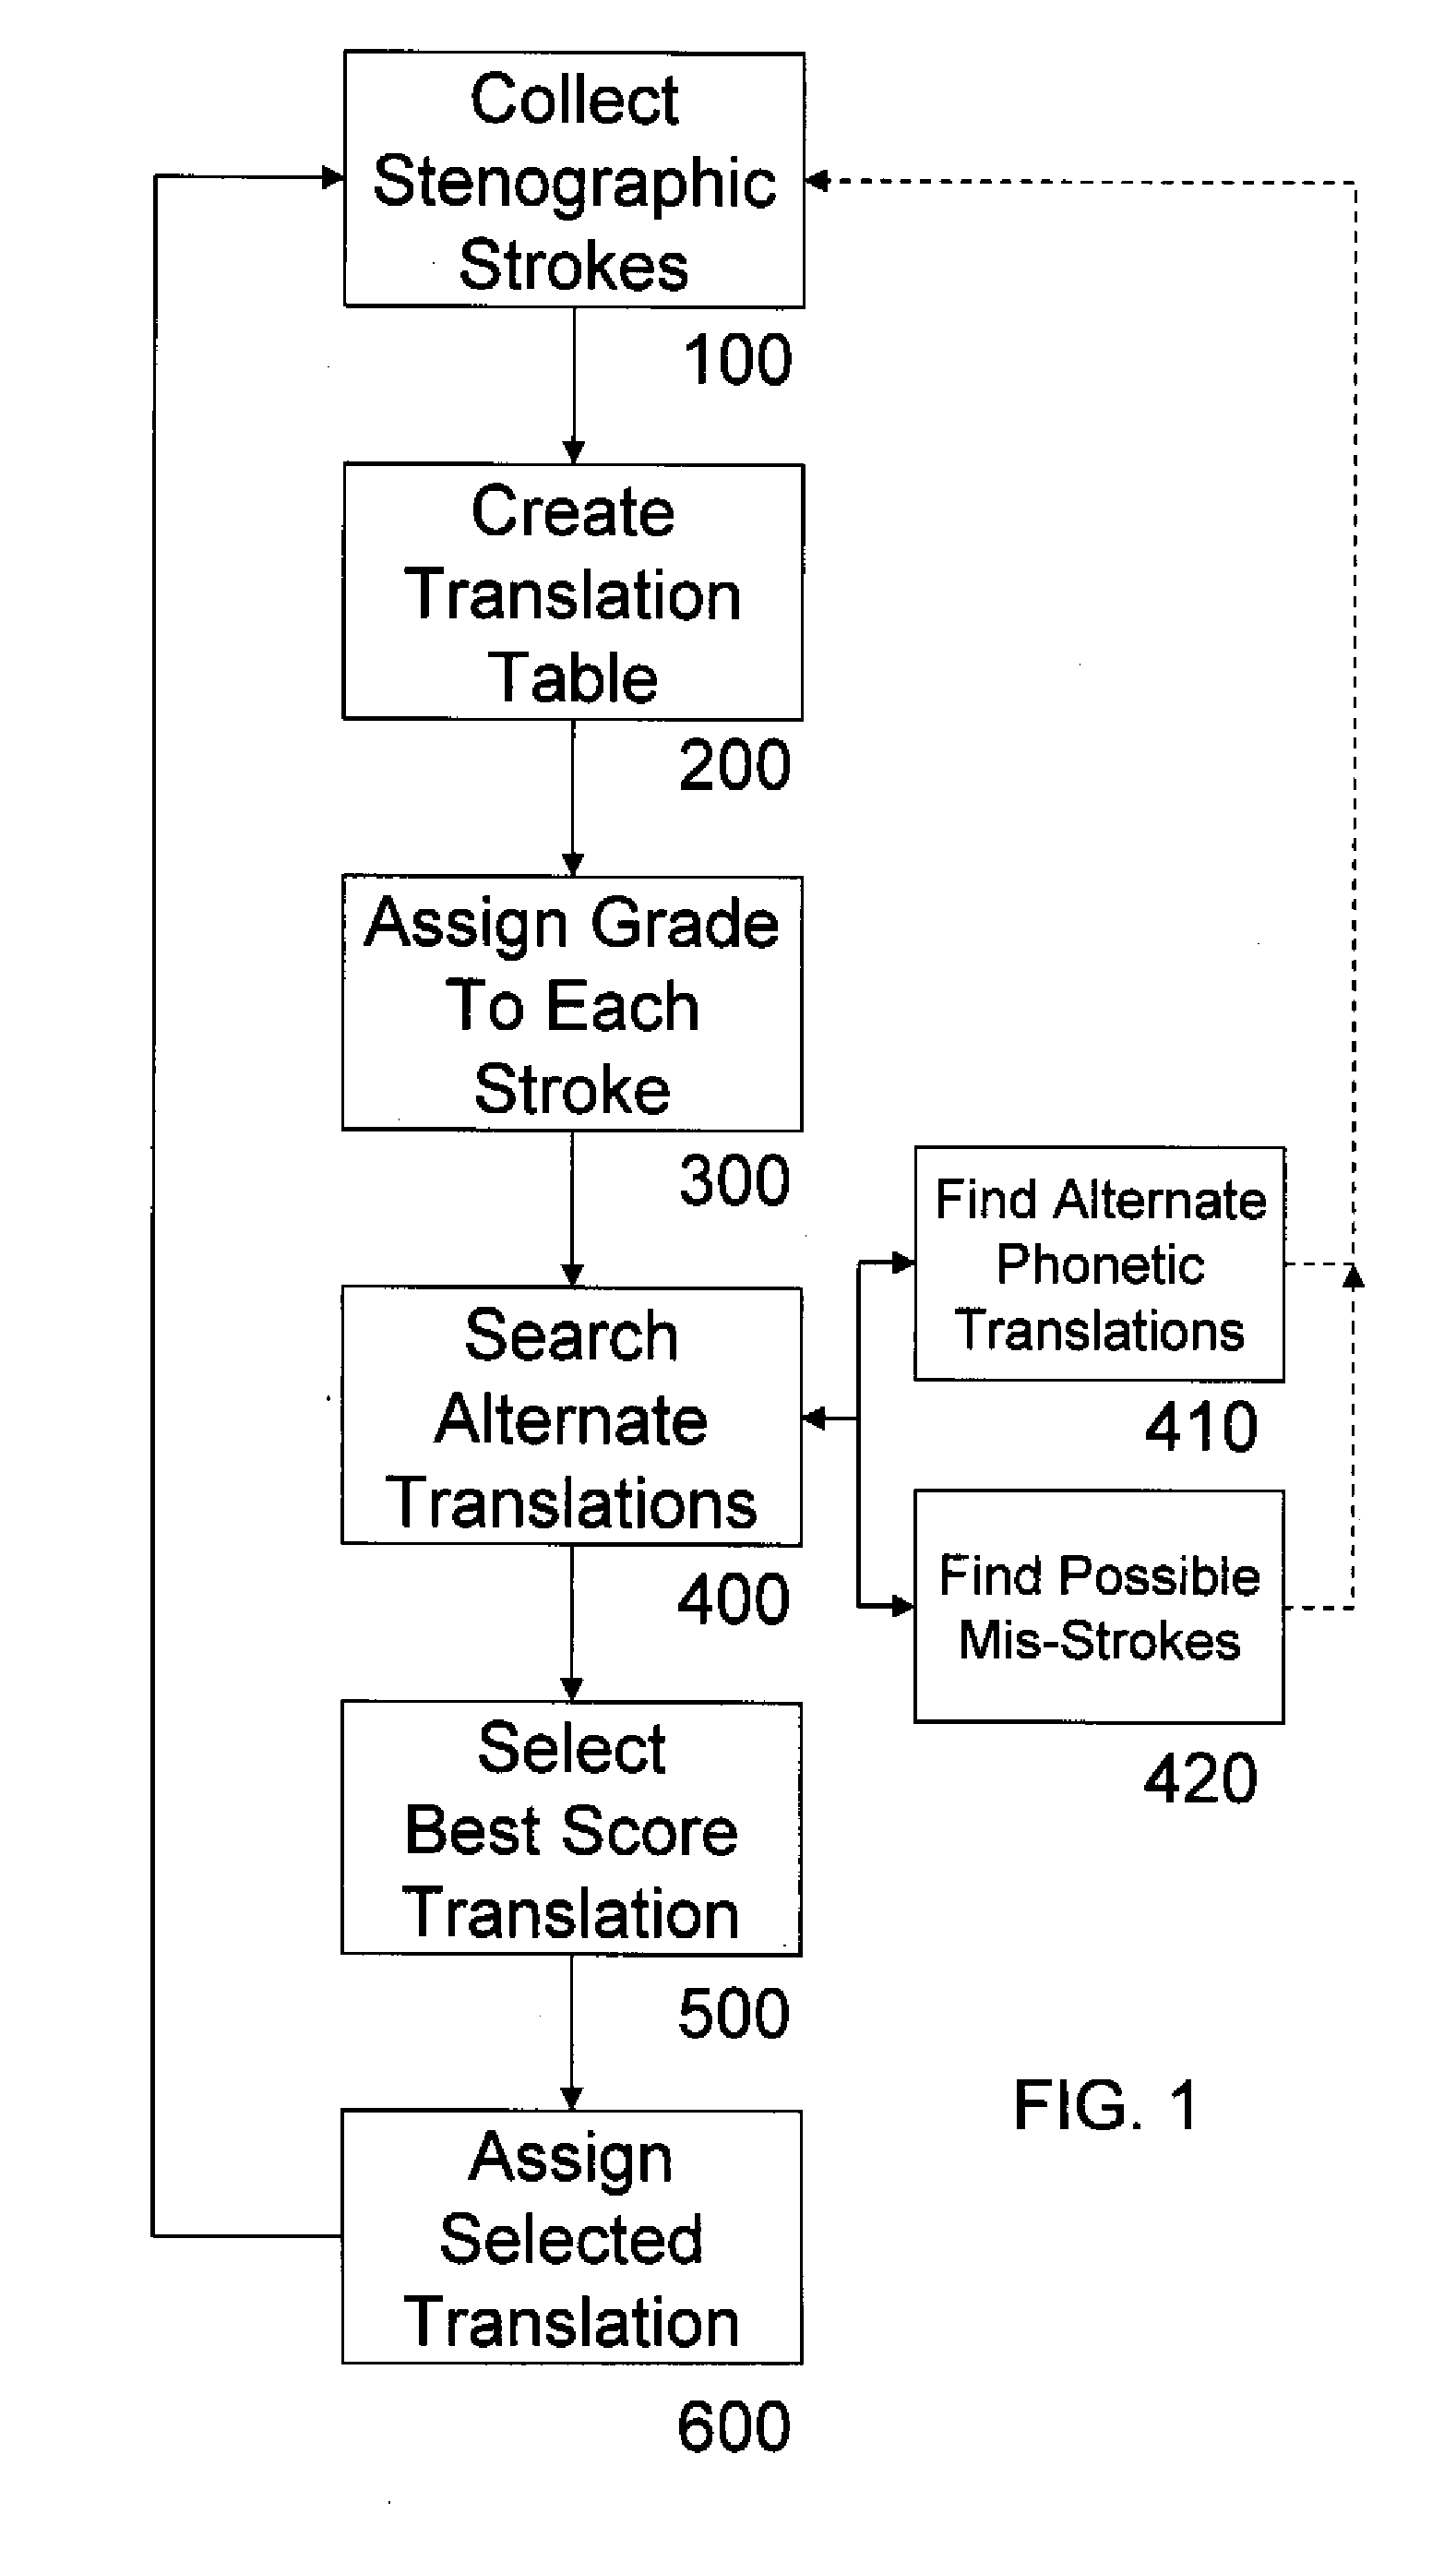 Process for translating machine shorthand into text